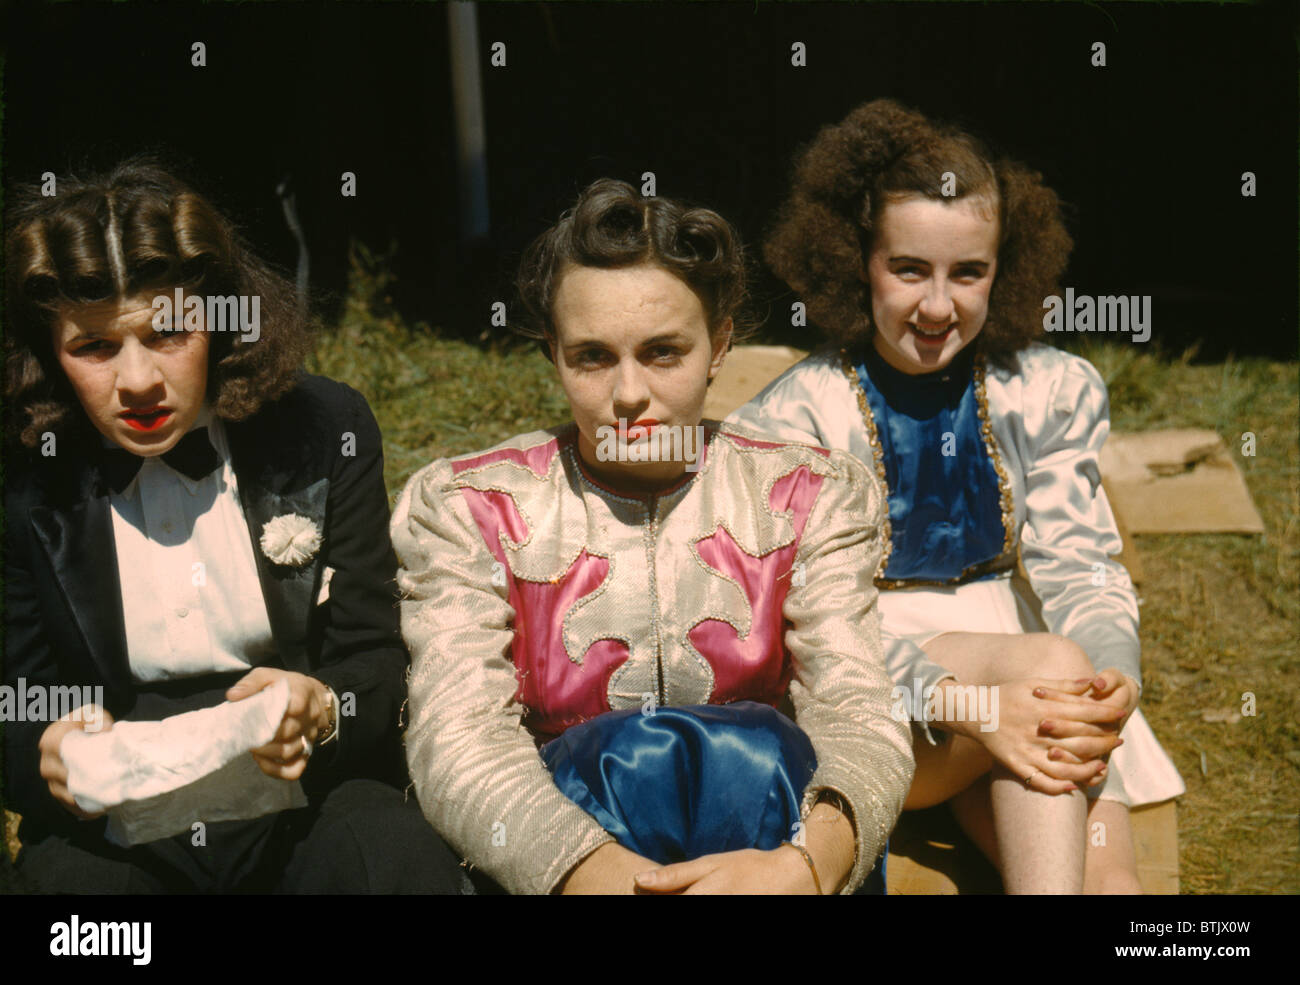 Women carnival performers, original title: 'Backstage at the girlie show at the Vermont state fair', Rutland, photograph by Jack Delano, September, 1941. Stock Photo